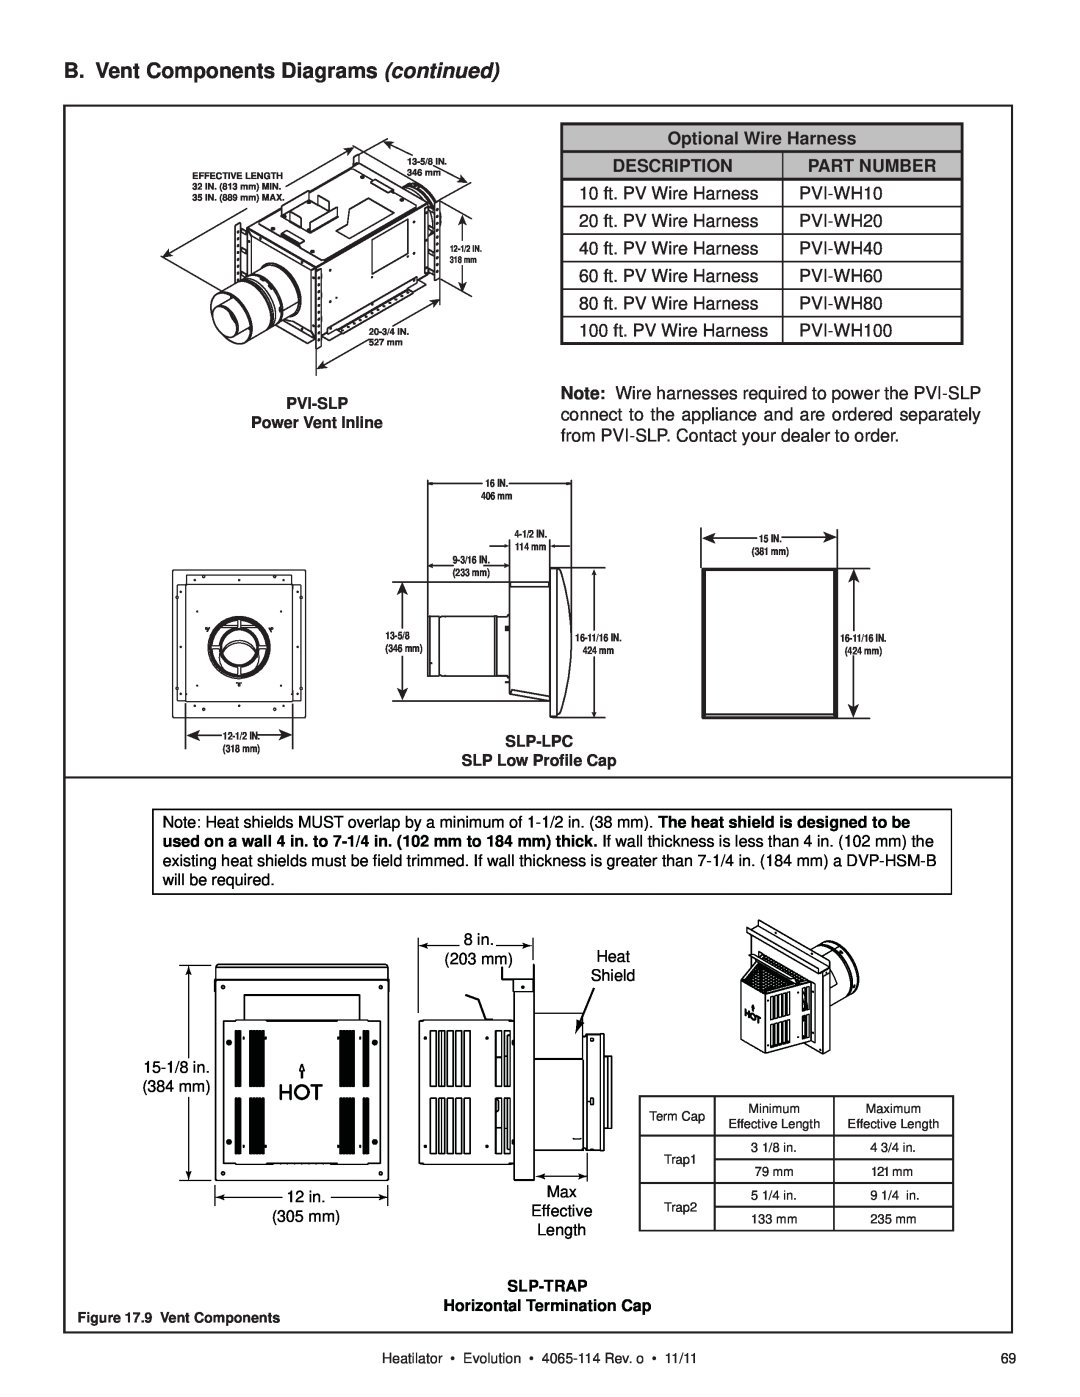 Heatiator NEVO4236I NEVO3630I B. Vent Components Diagrams continued, Optional Wire Harness, Description, Part Number 